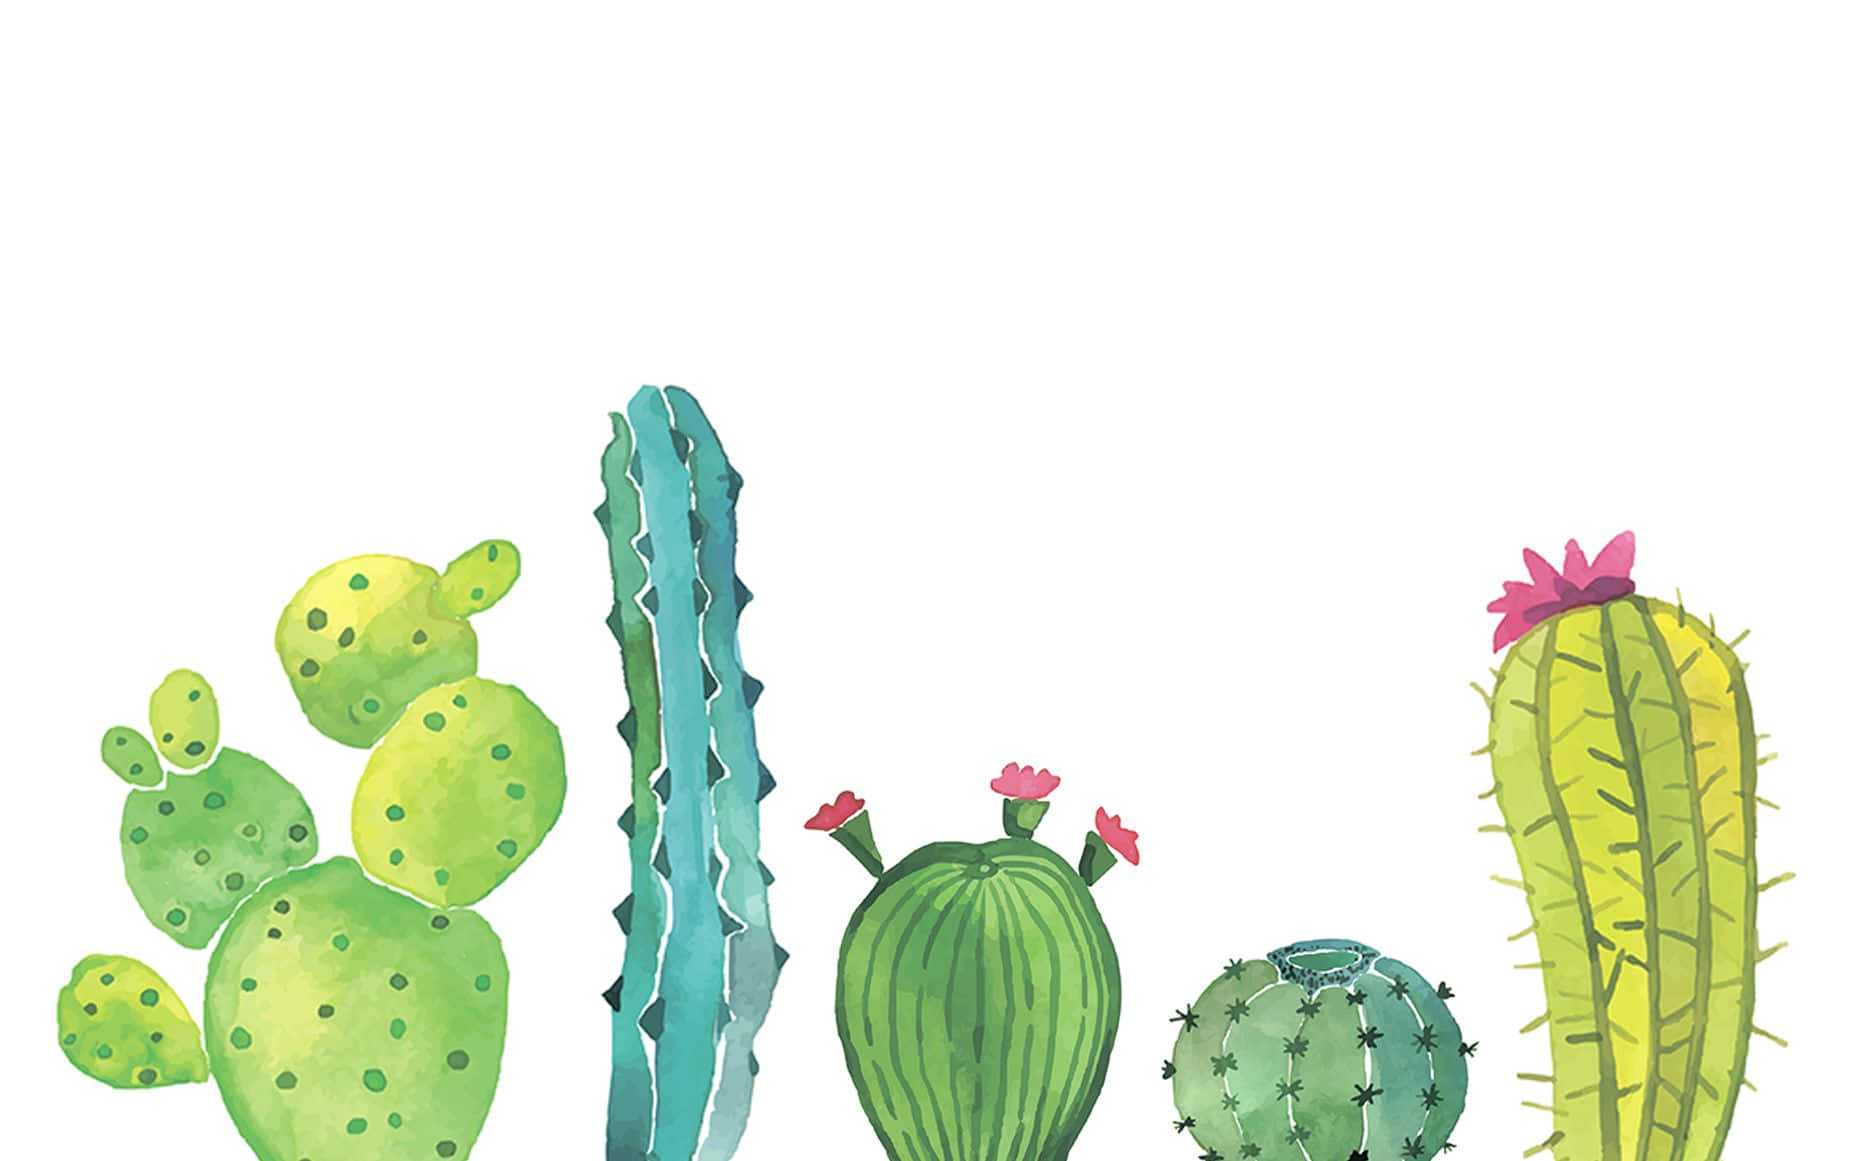 Cactus Watercolor Painting Art Picture